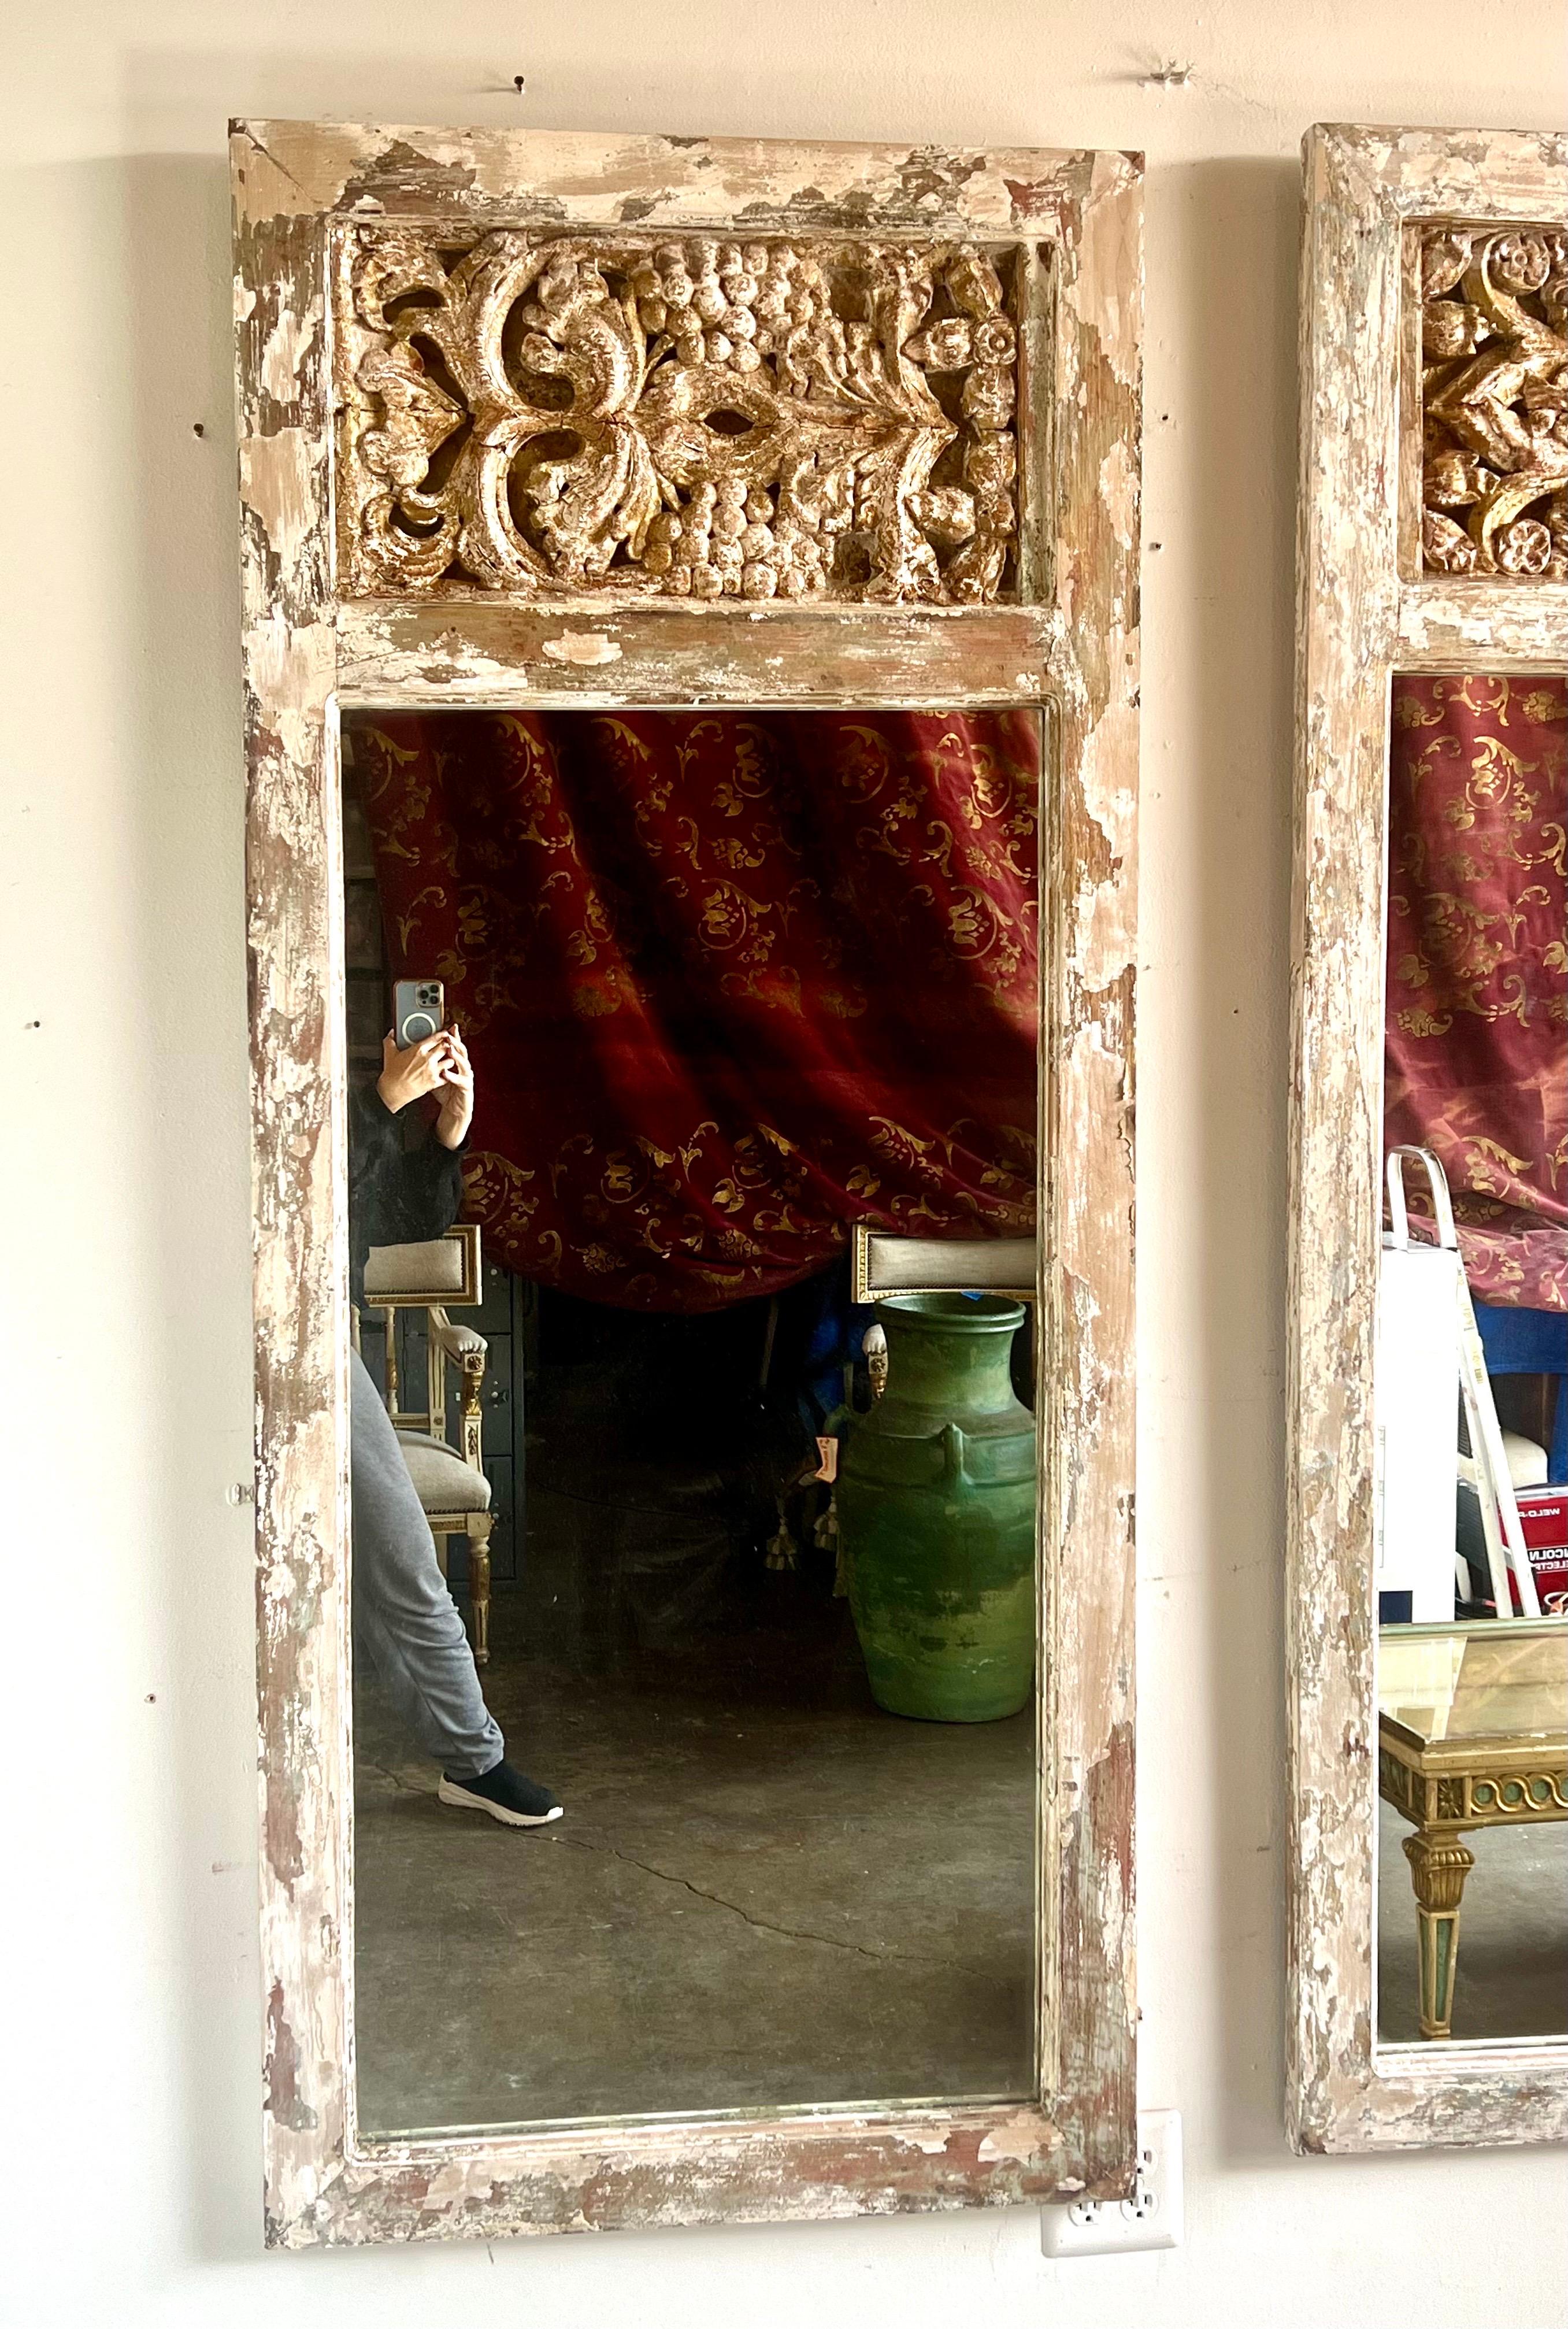 Pair of tall, rectangular mirrors, each adorned with ornate, gilded carvings at the top.  The carvings feature classical motifs, including acanthus leaves and floral design, which add a touch of opulence and historical elegance.  The painted frames